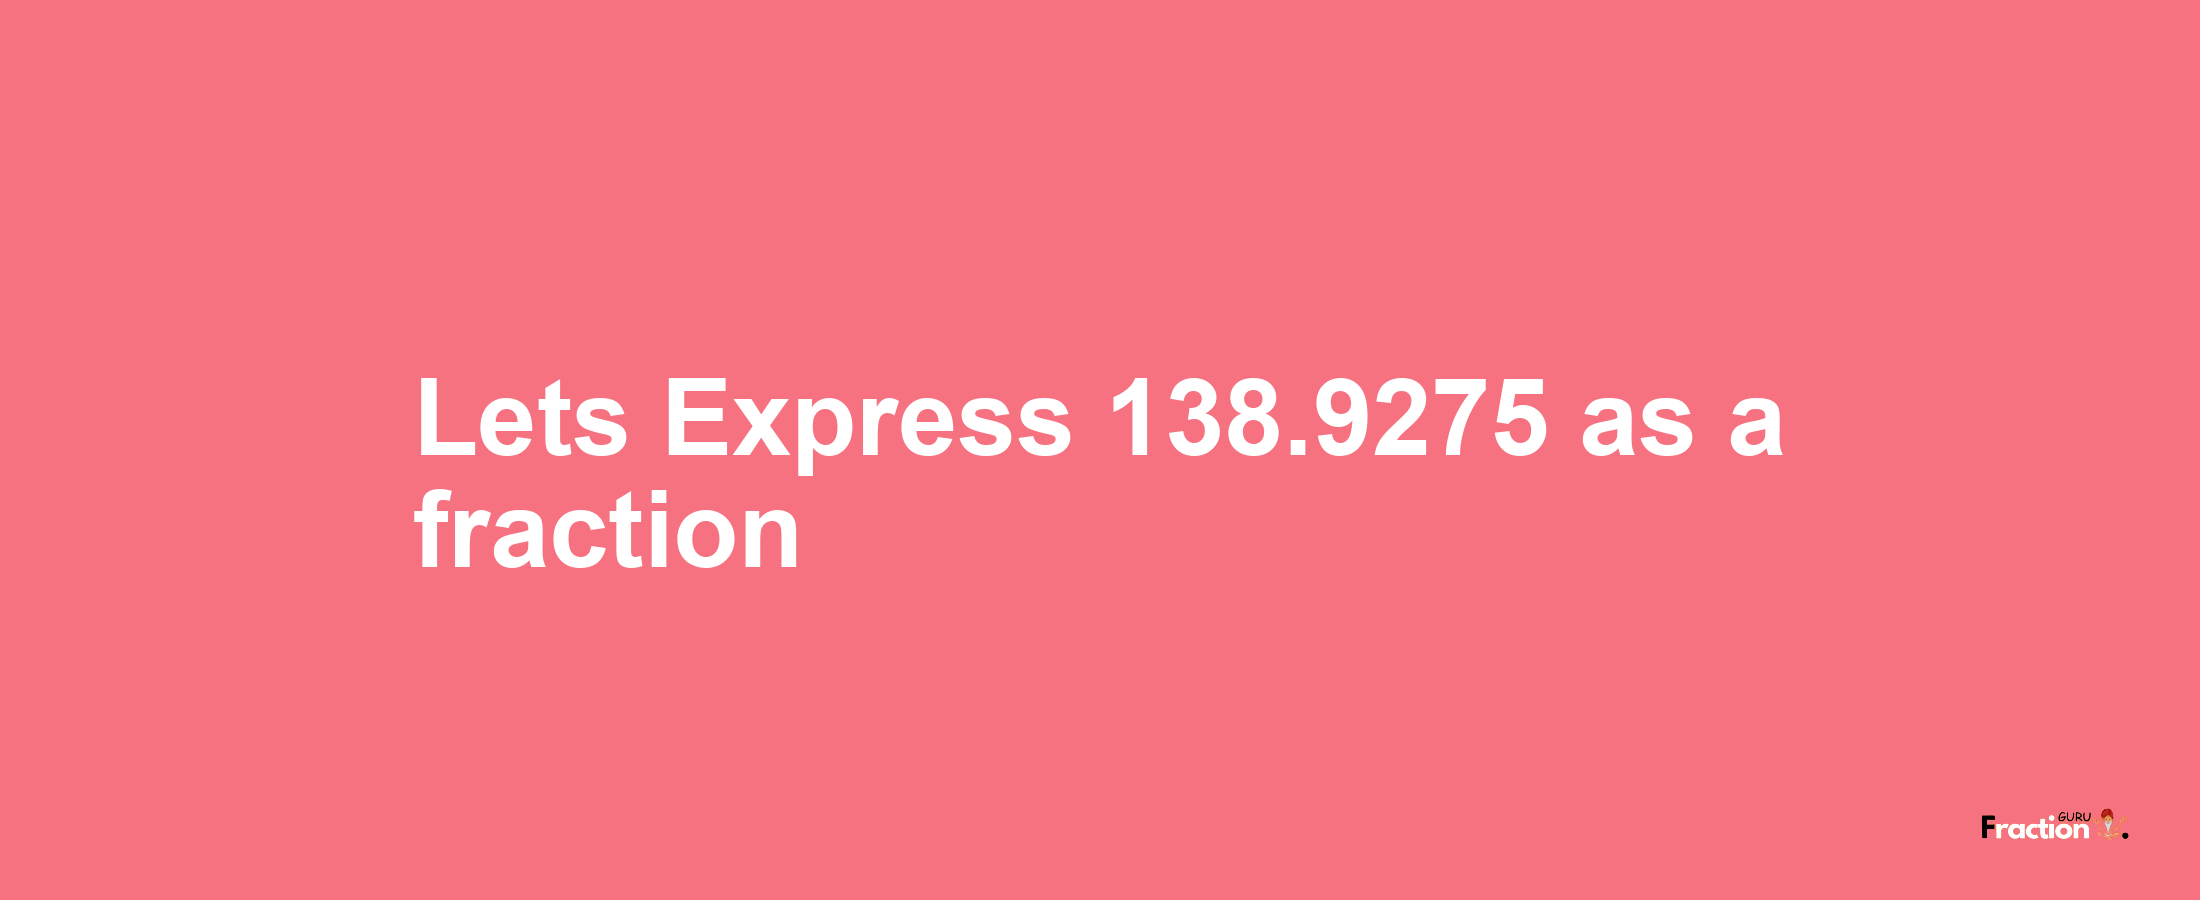 Lets Express 138.9275 as afraction